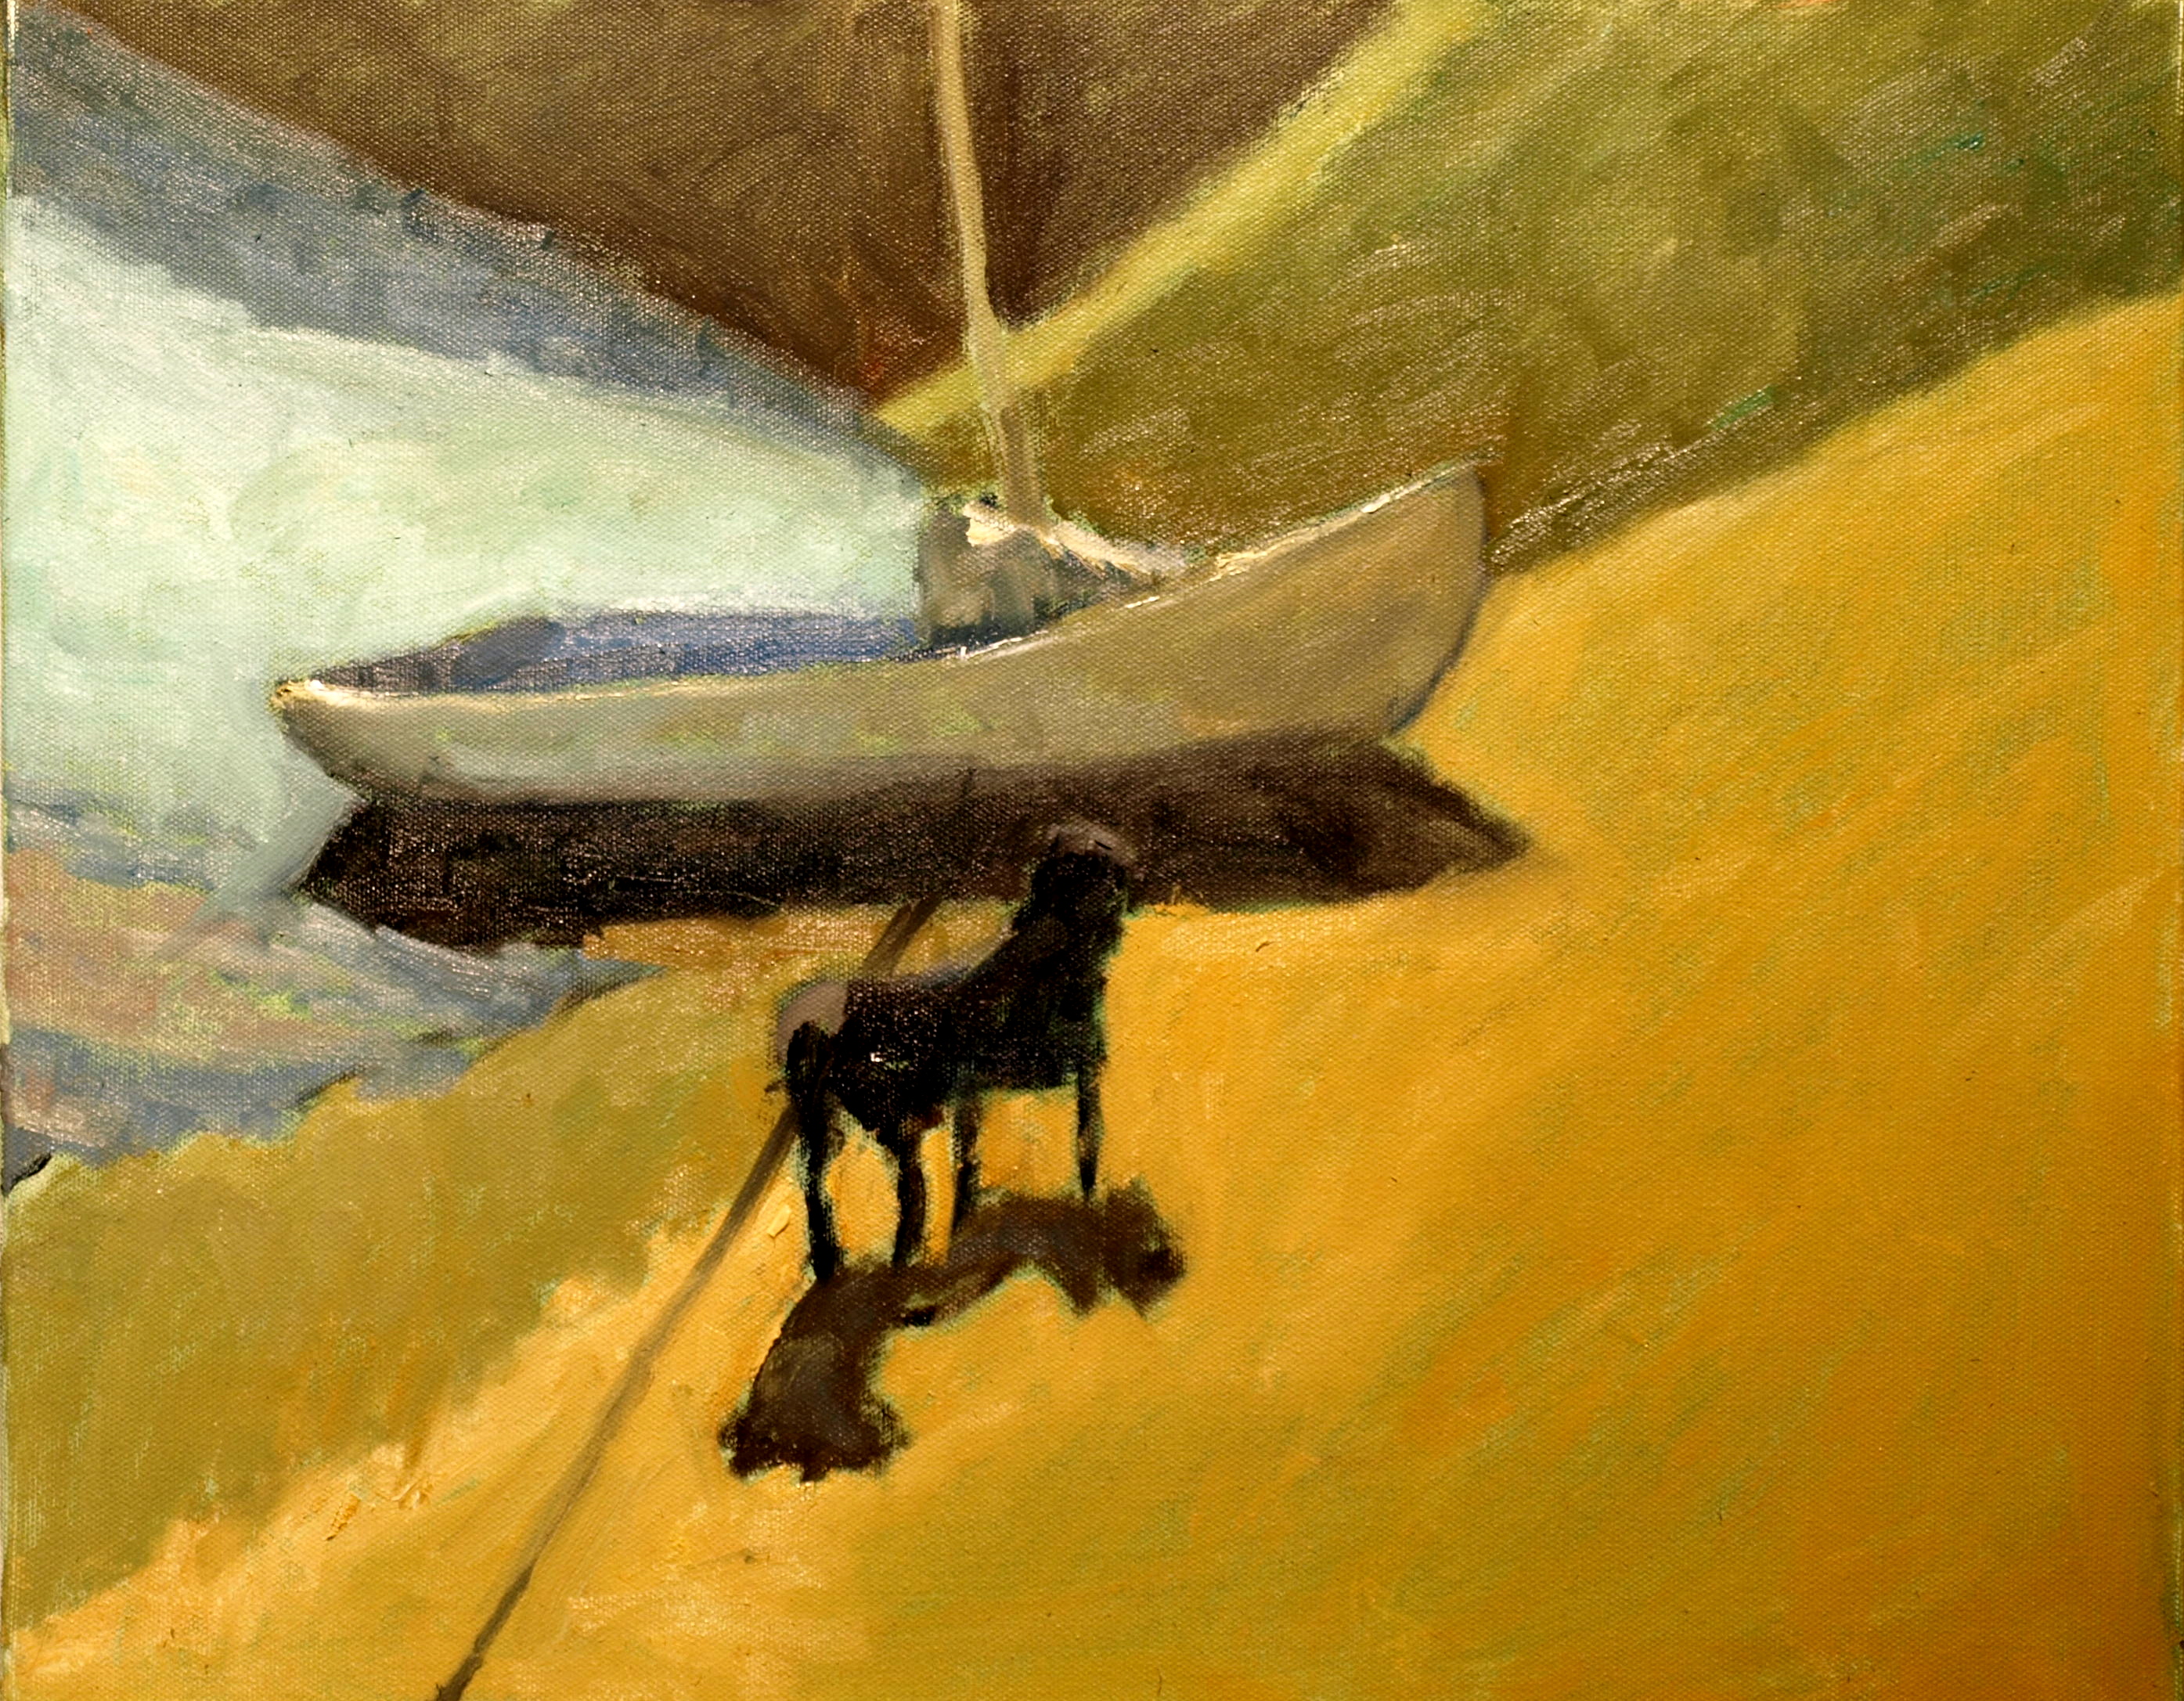 Sailboat and Dog, Oil on Canvas, 16 x 20 Inches, by Richard Stalter, $450